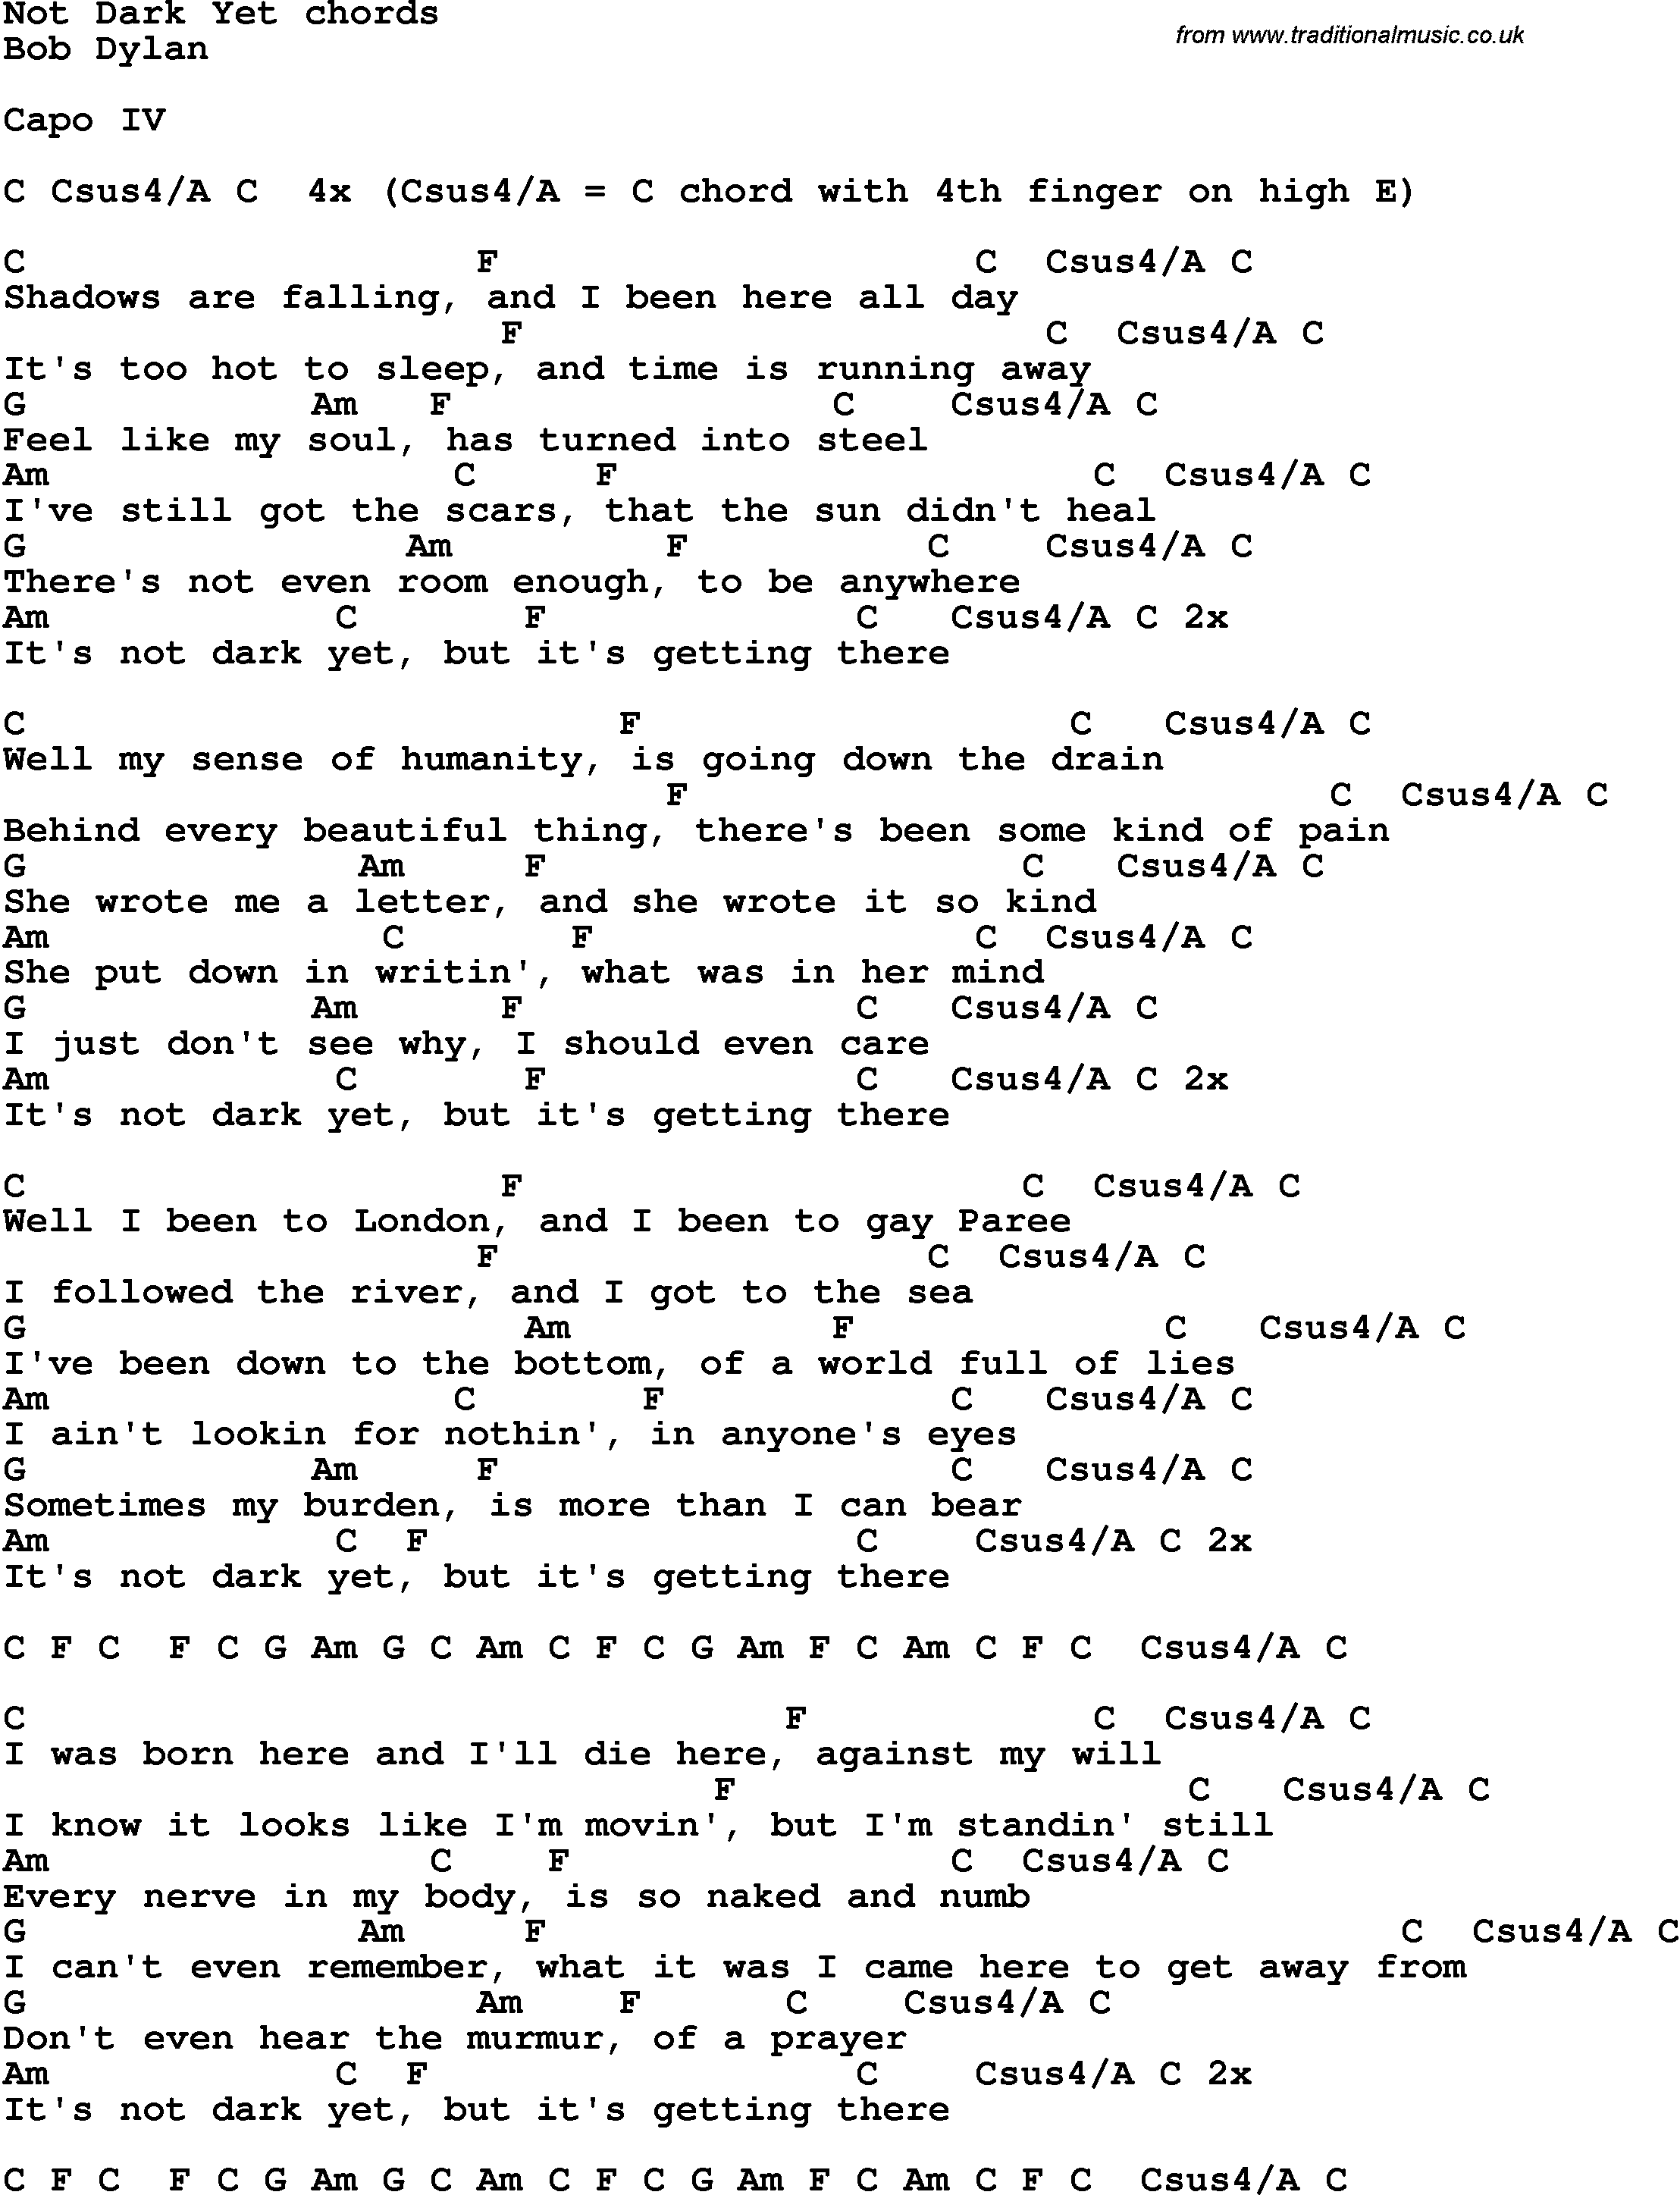 Song Lyrics with guitar chords for Not Dark Yet